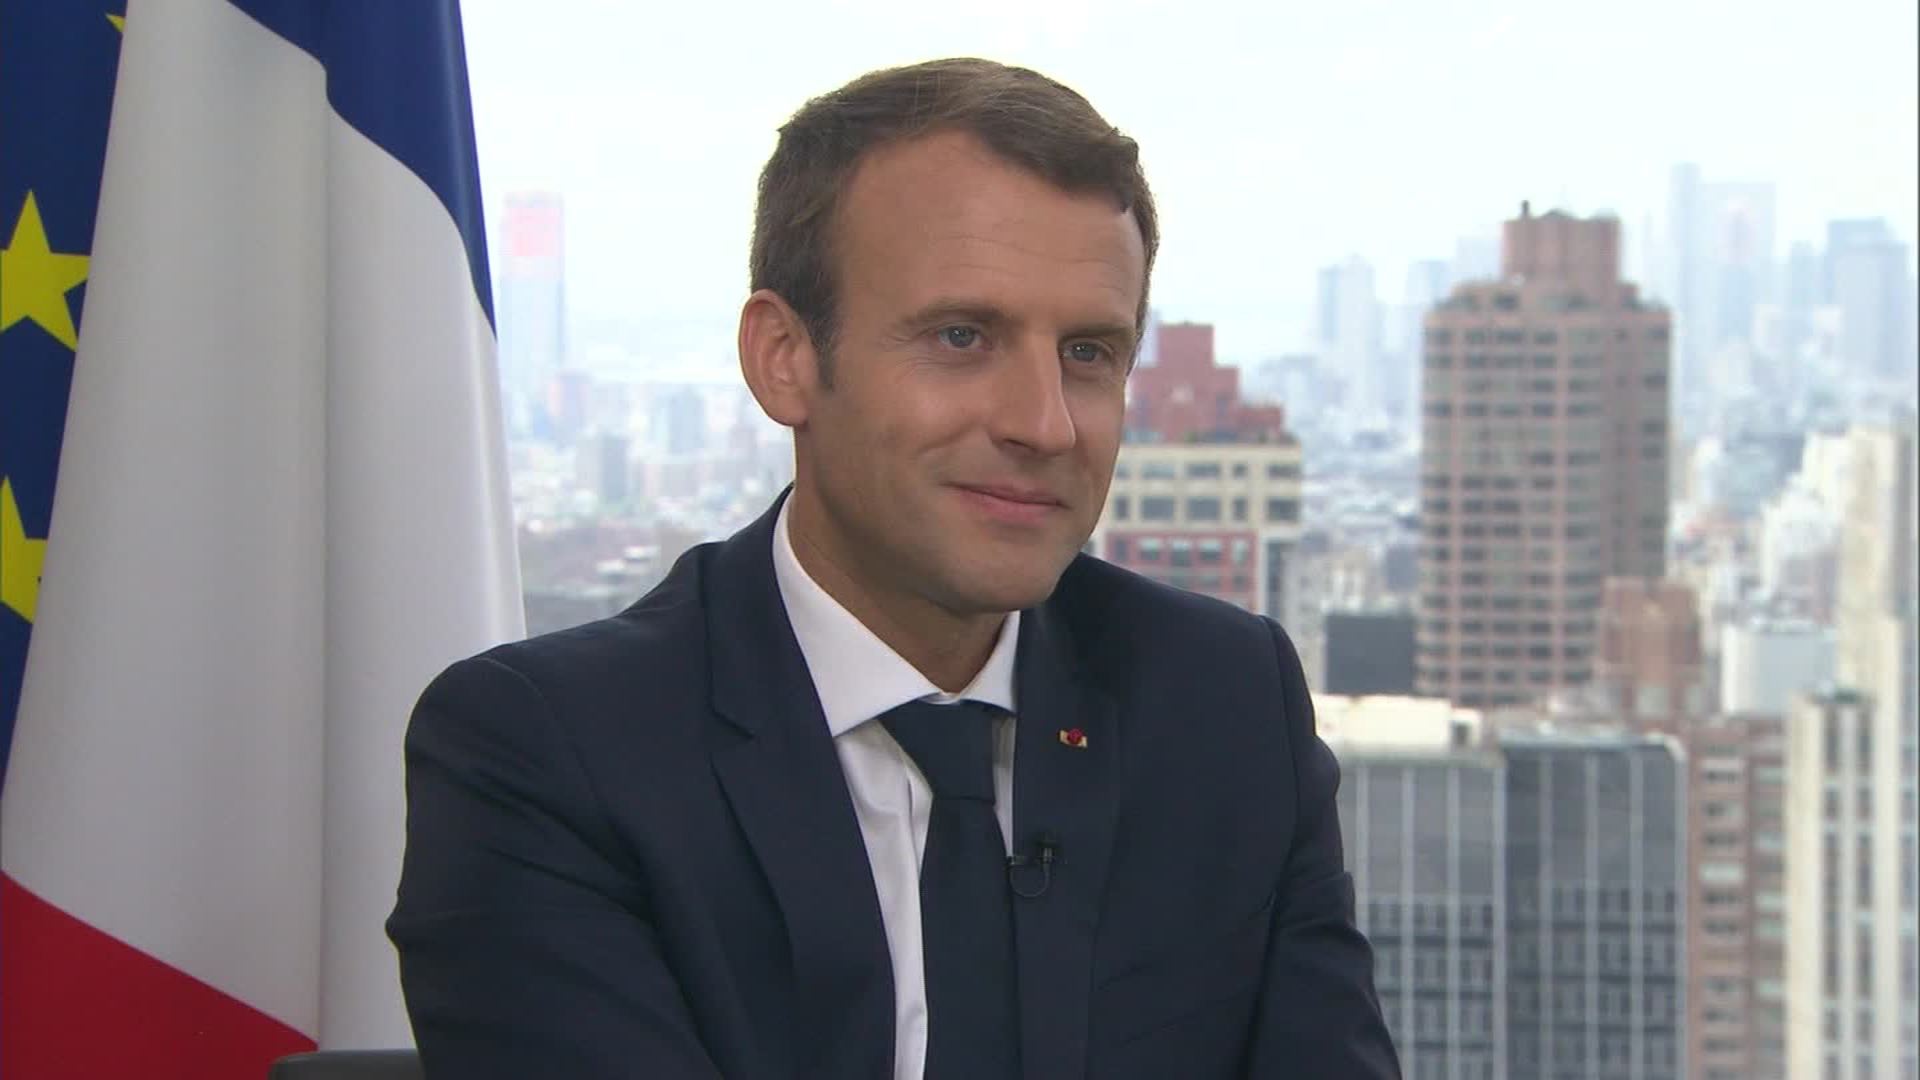 Emmanuel Macron's exclusive interview with CNN